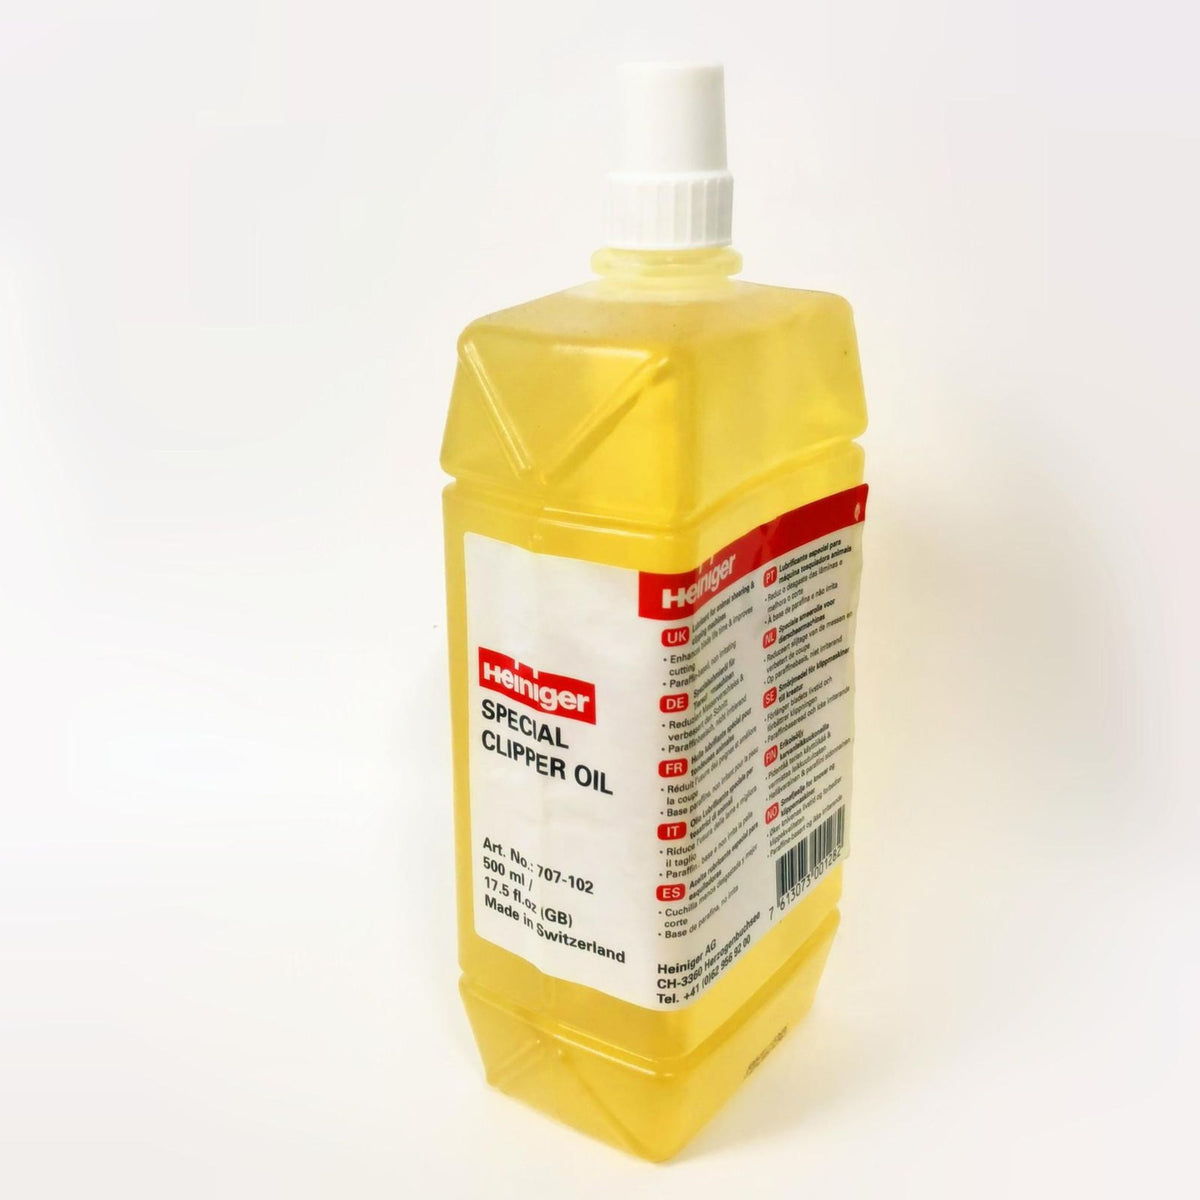 Transparent bottle of yellow oil with red and white label.